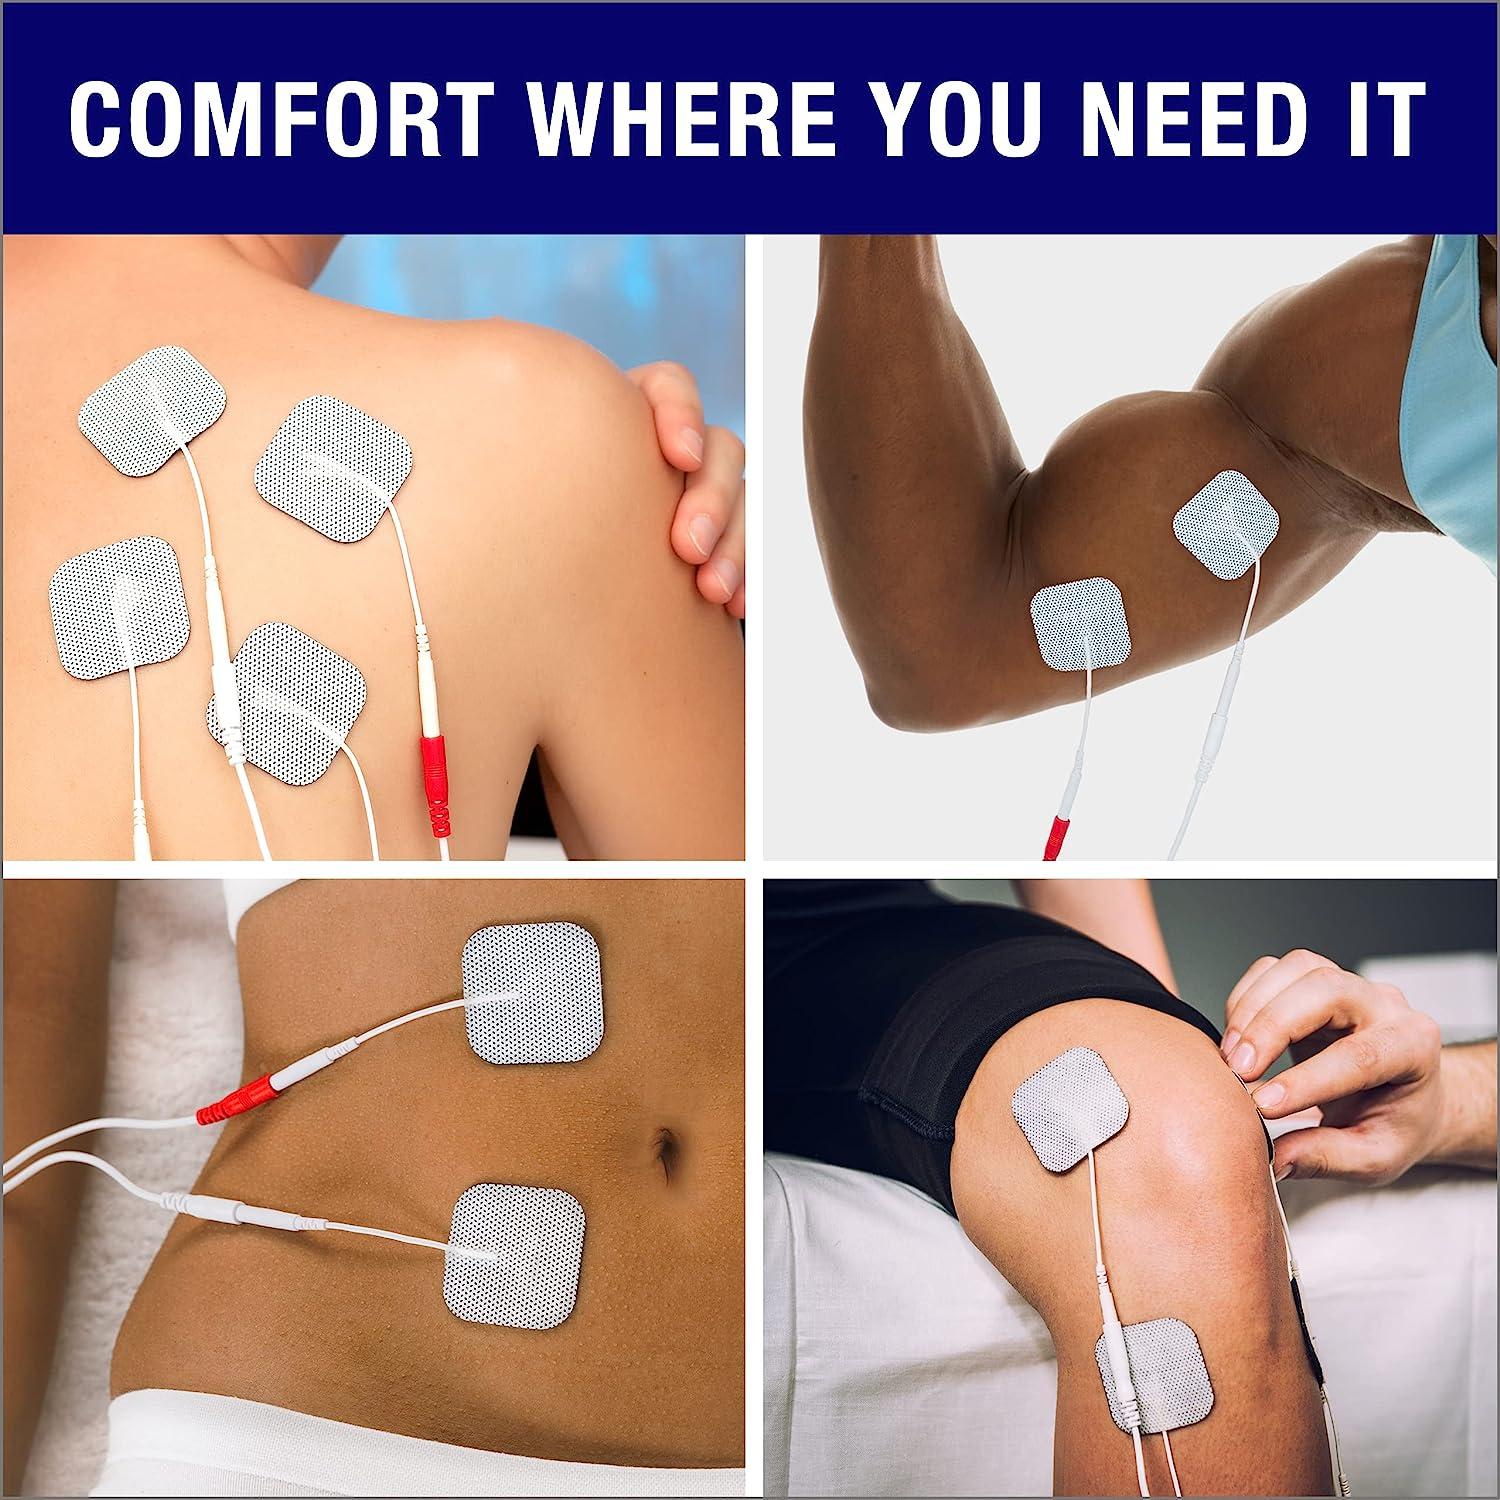 EMPI SELECT ELECTROTHERAPY PAIN MANAGEMENT MUSCLE STIMULATOR 